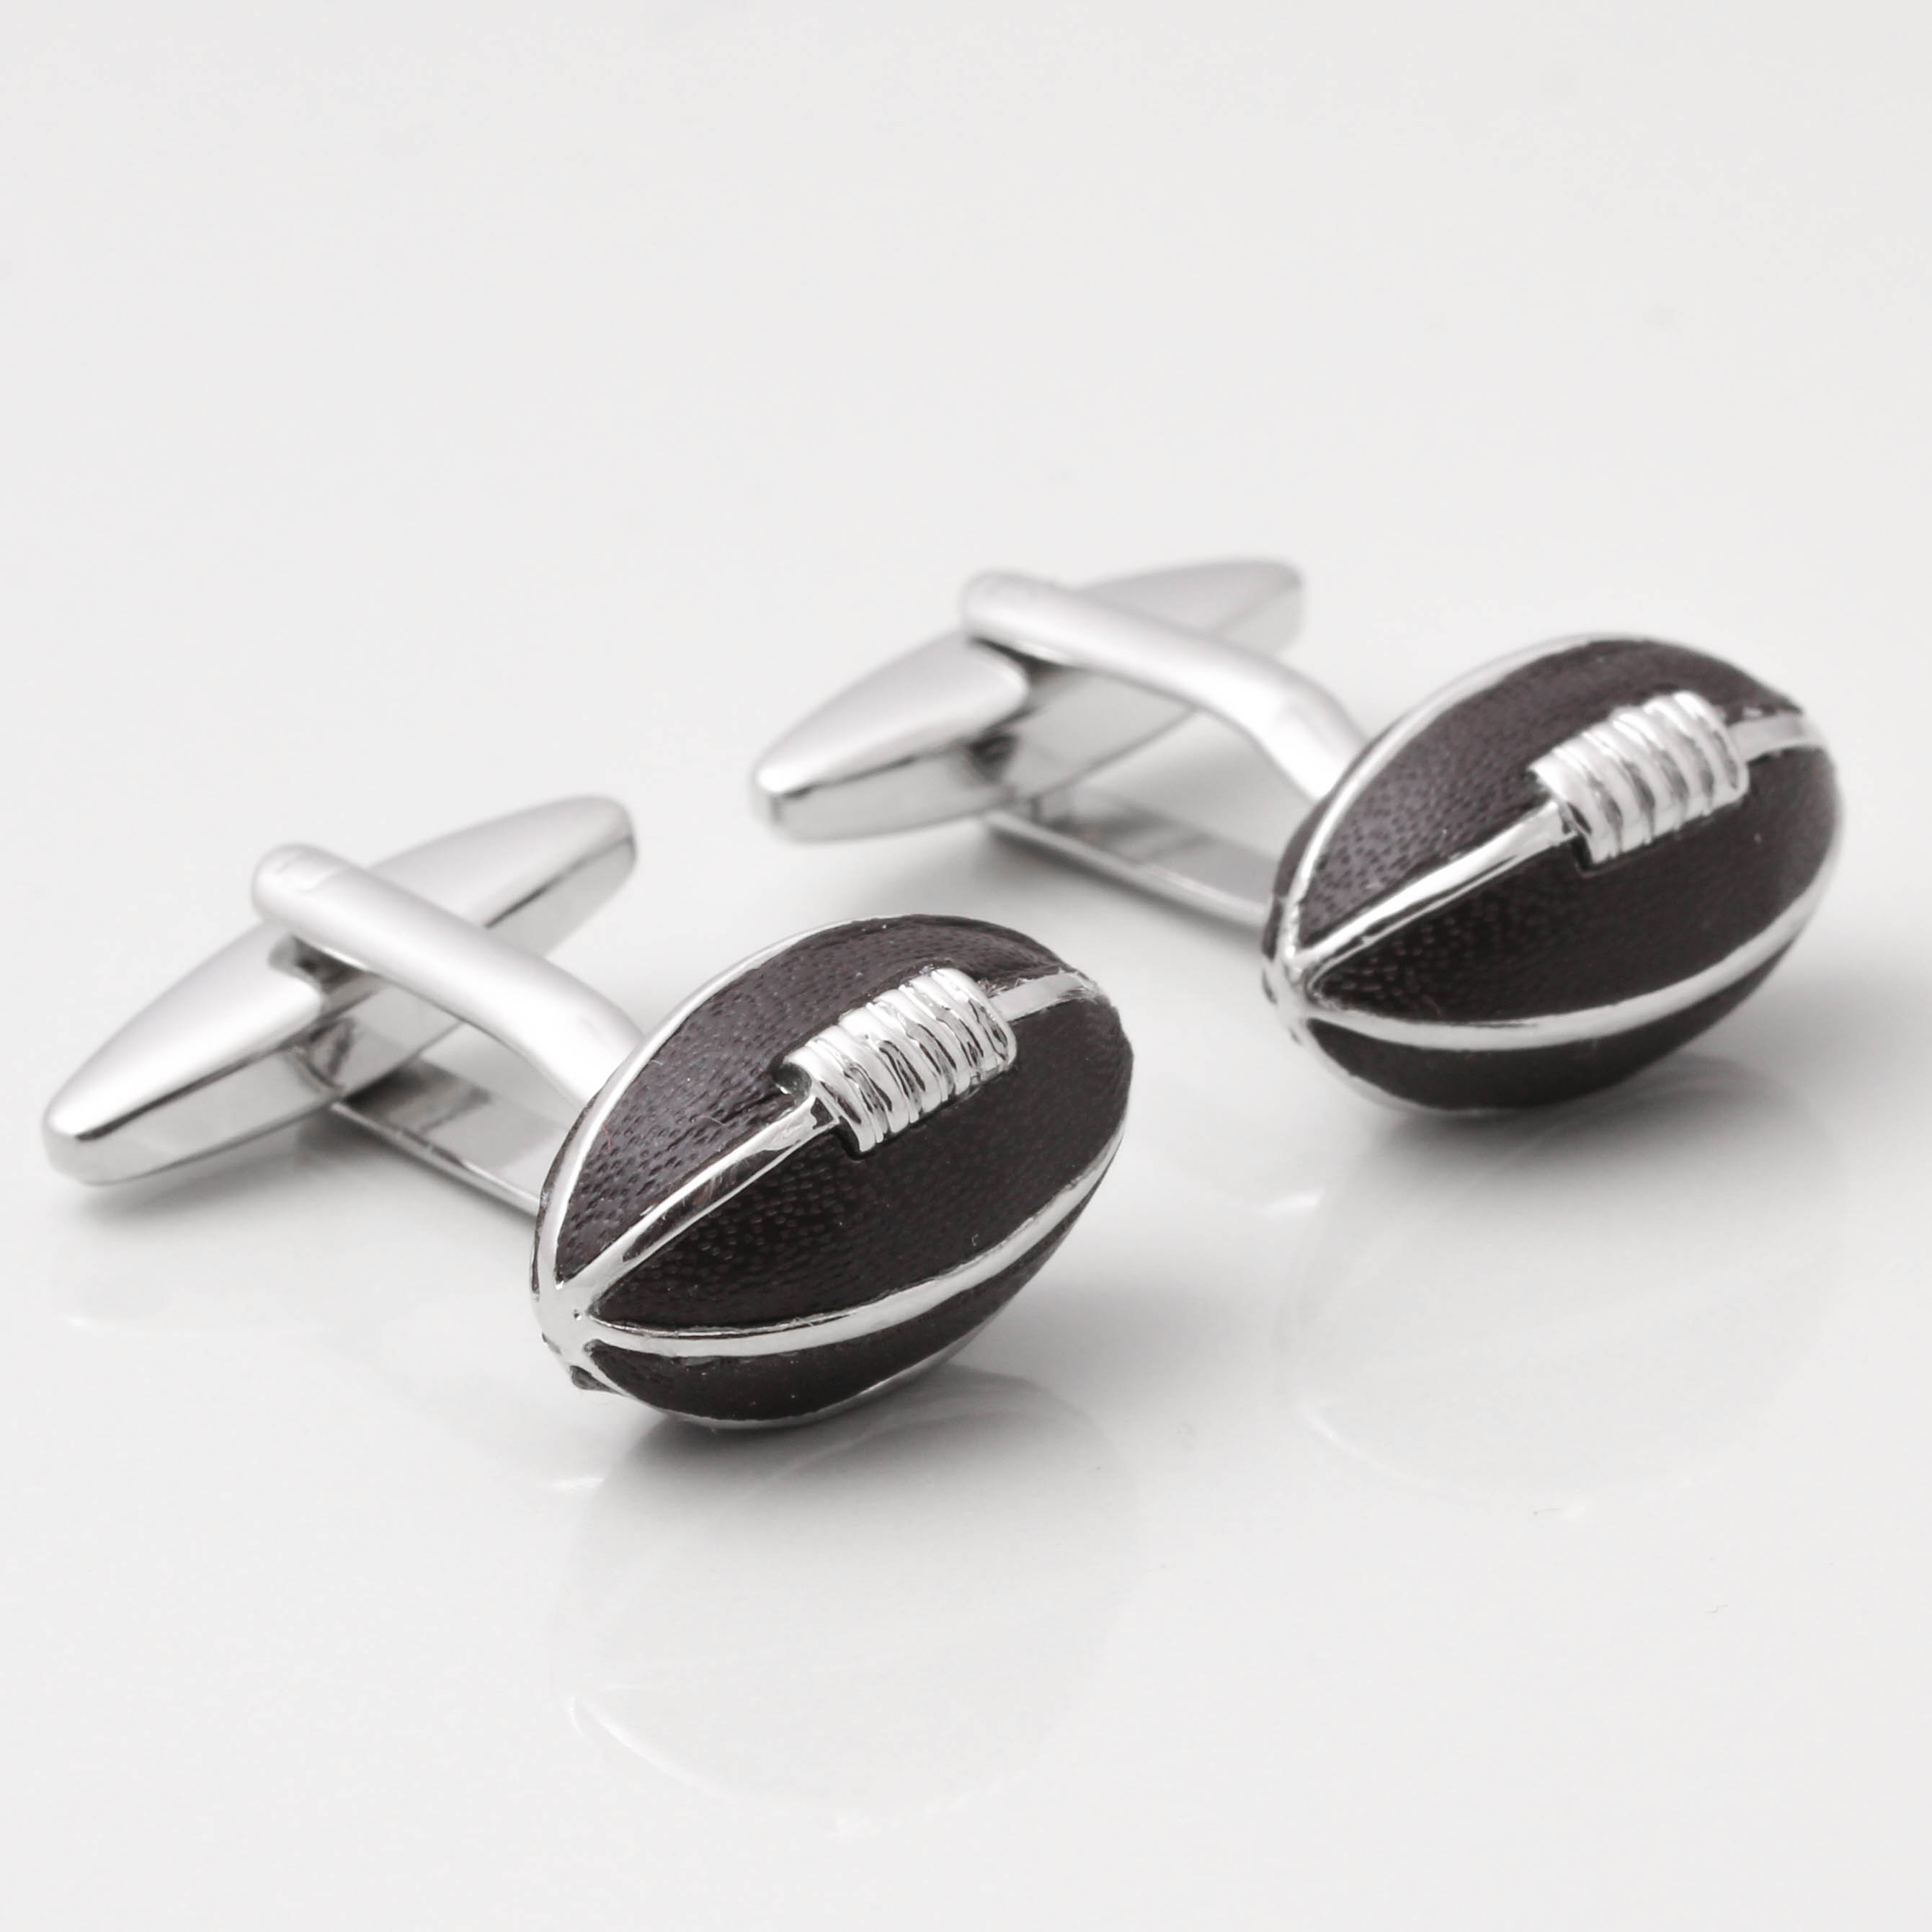 Rugby Ball Rugger Novelty Cufflinks by Onyx Art New Boxed CK70 